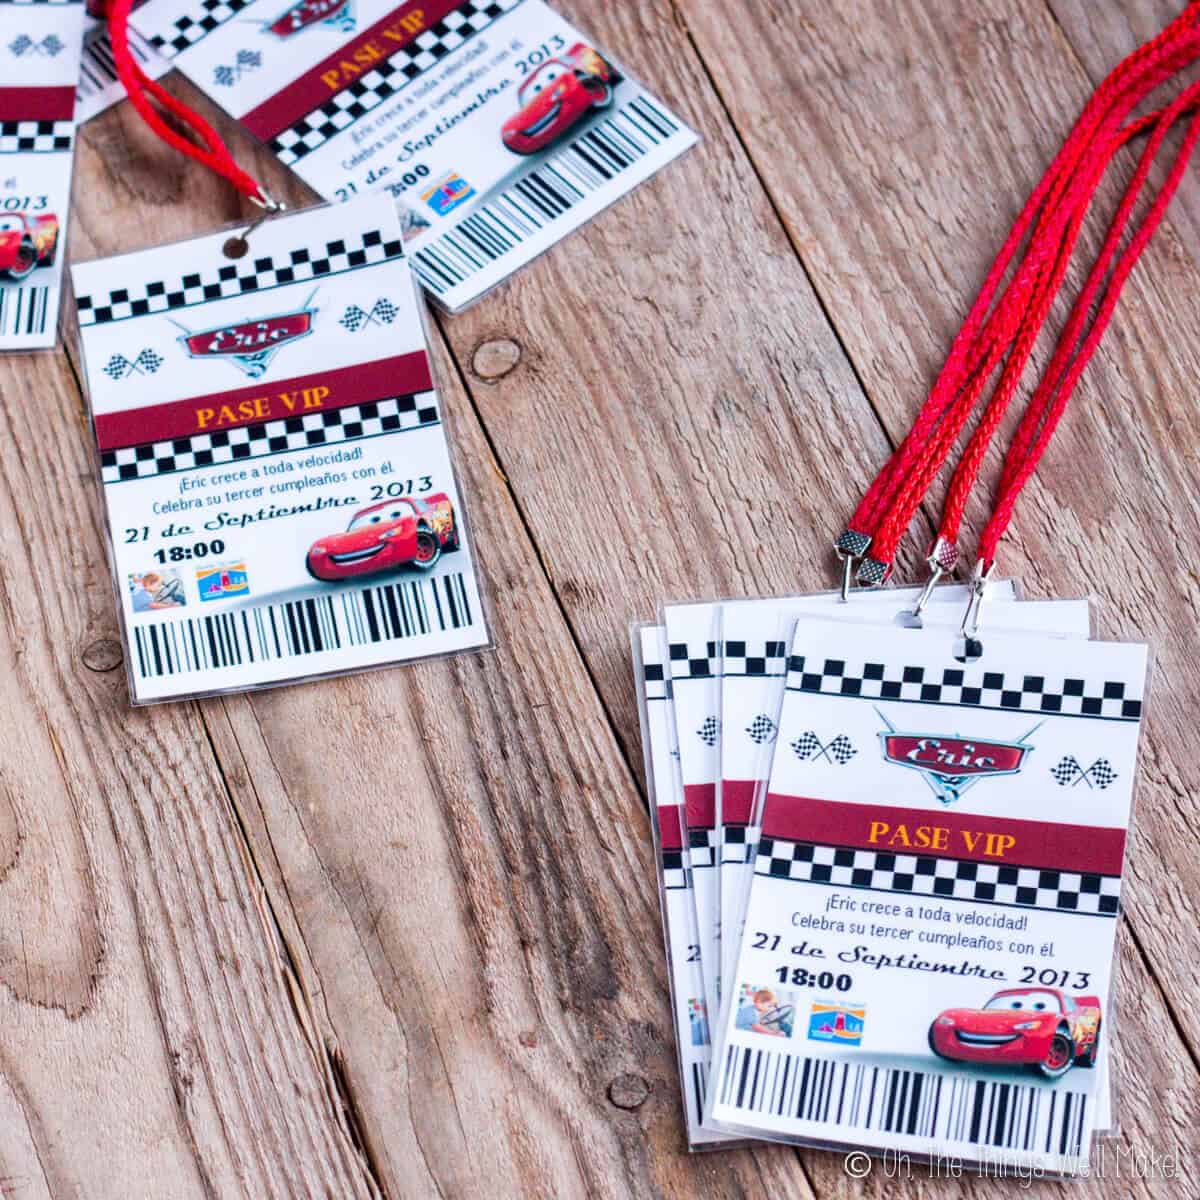 Cars party invitations that look like pit passes on lanyards.